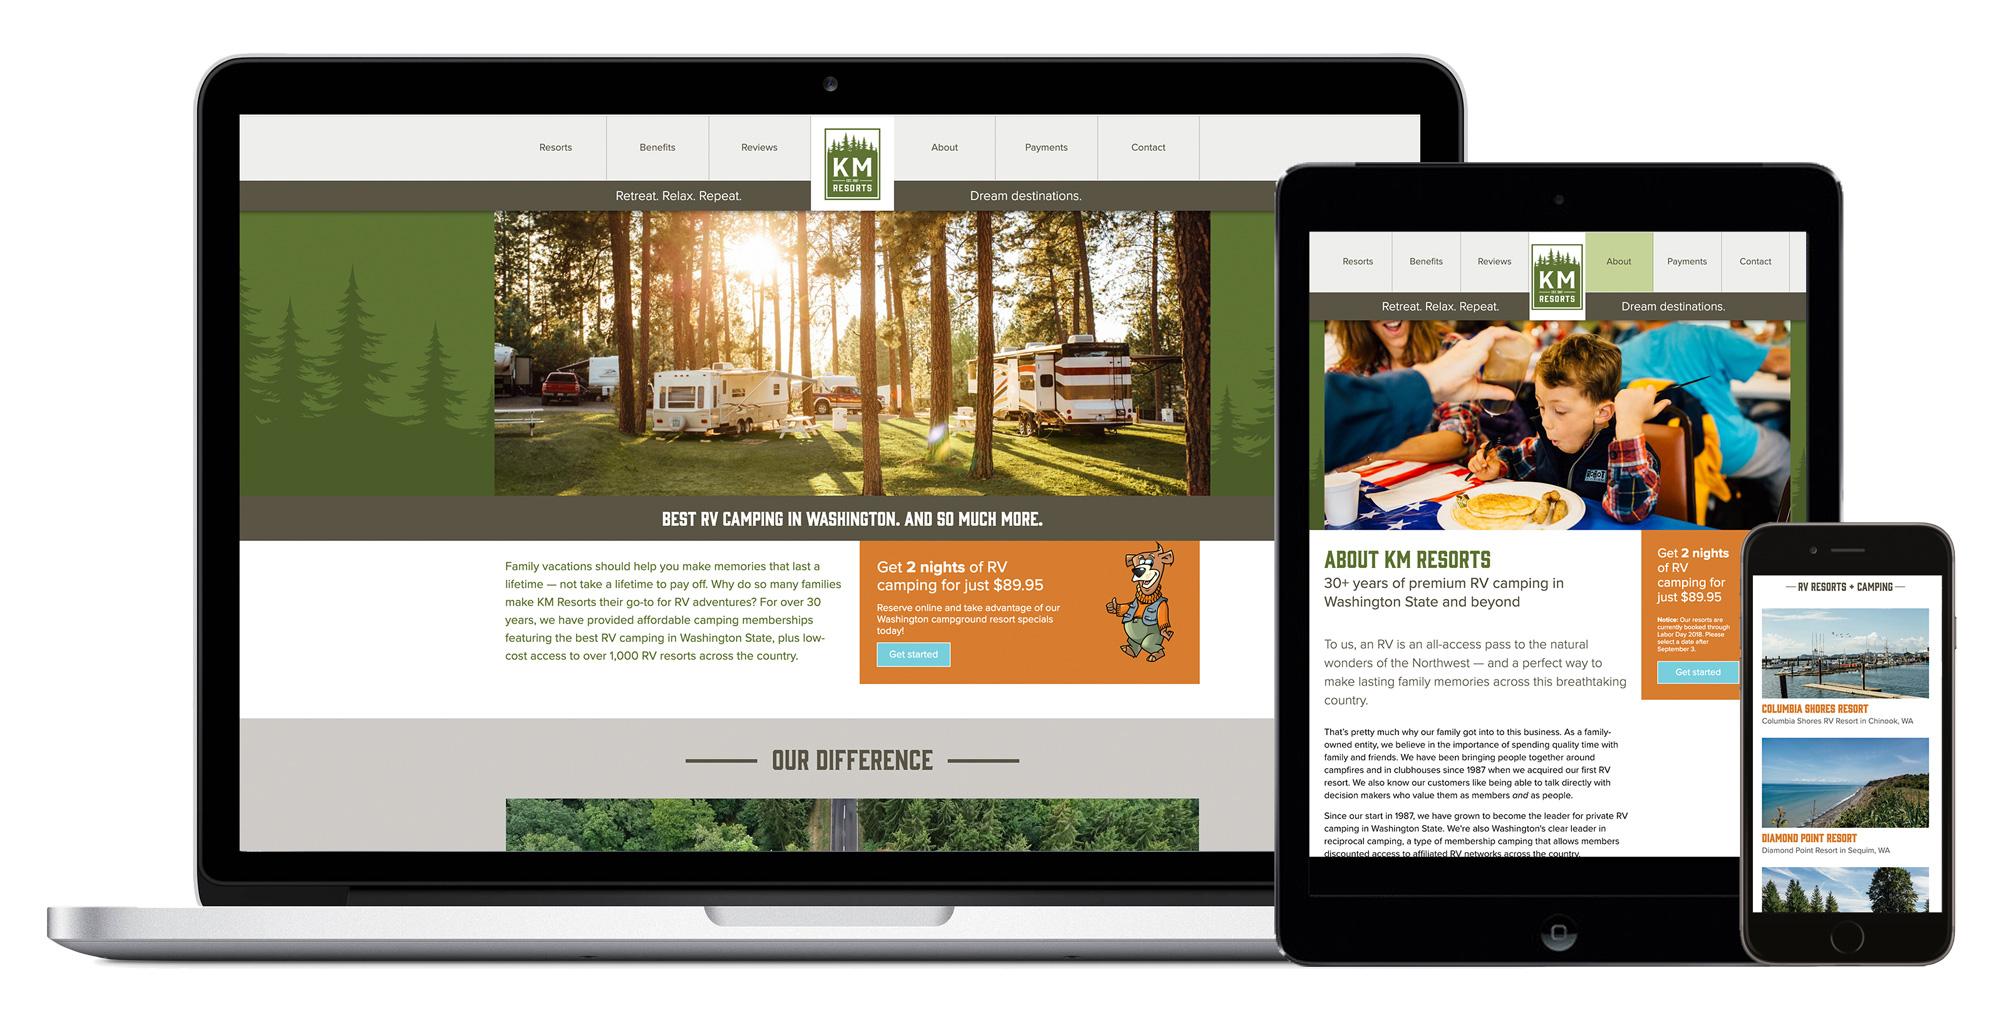 KM Resorts website layout on desktop, tablet, and mobile devices